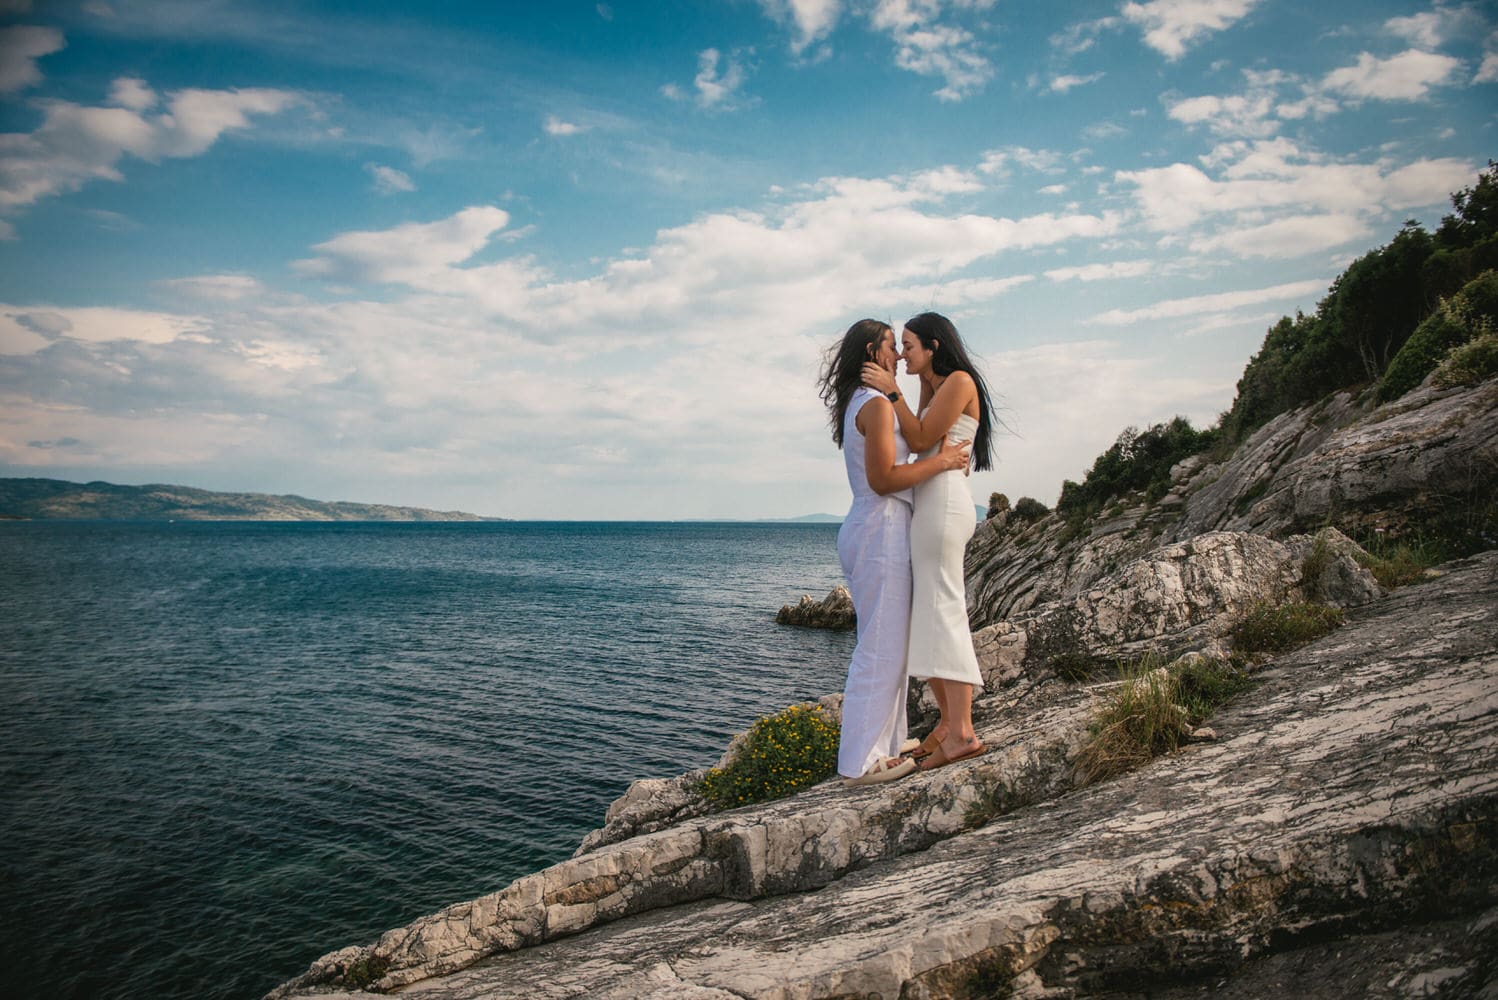 Coastal connection: Brides' footsteps along the shore, love's journey by the sea during their Corfu elopement.